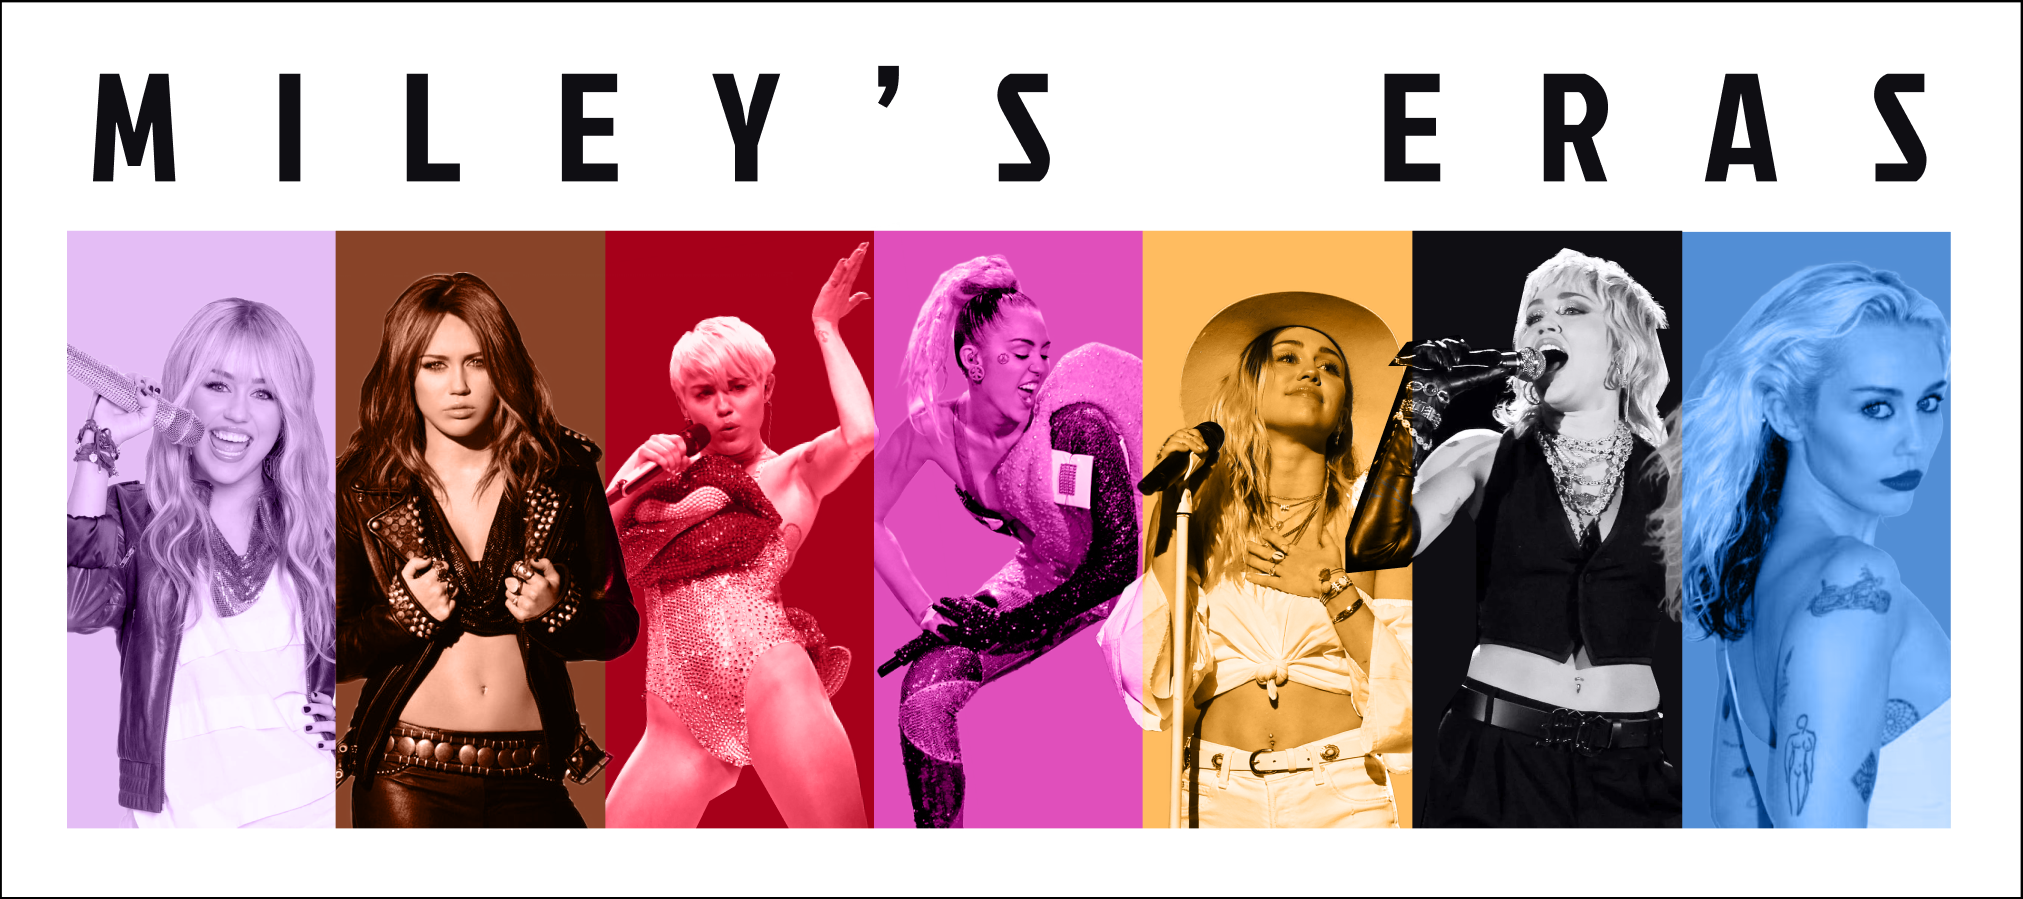 Miley Cyrus: Revisiting Miley's most iconic eras